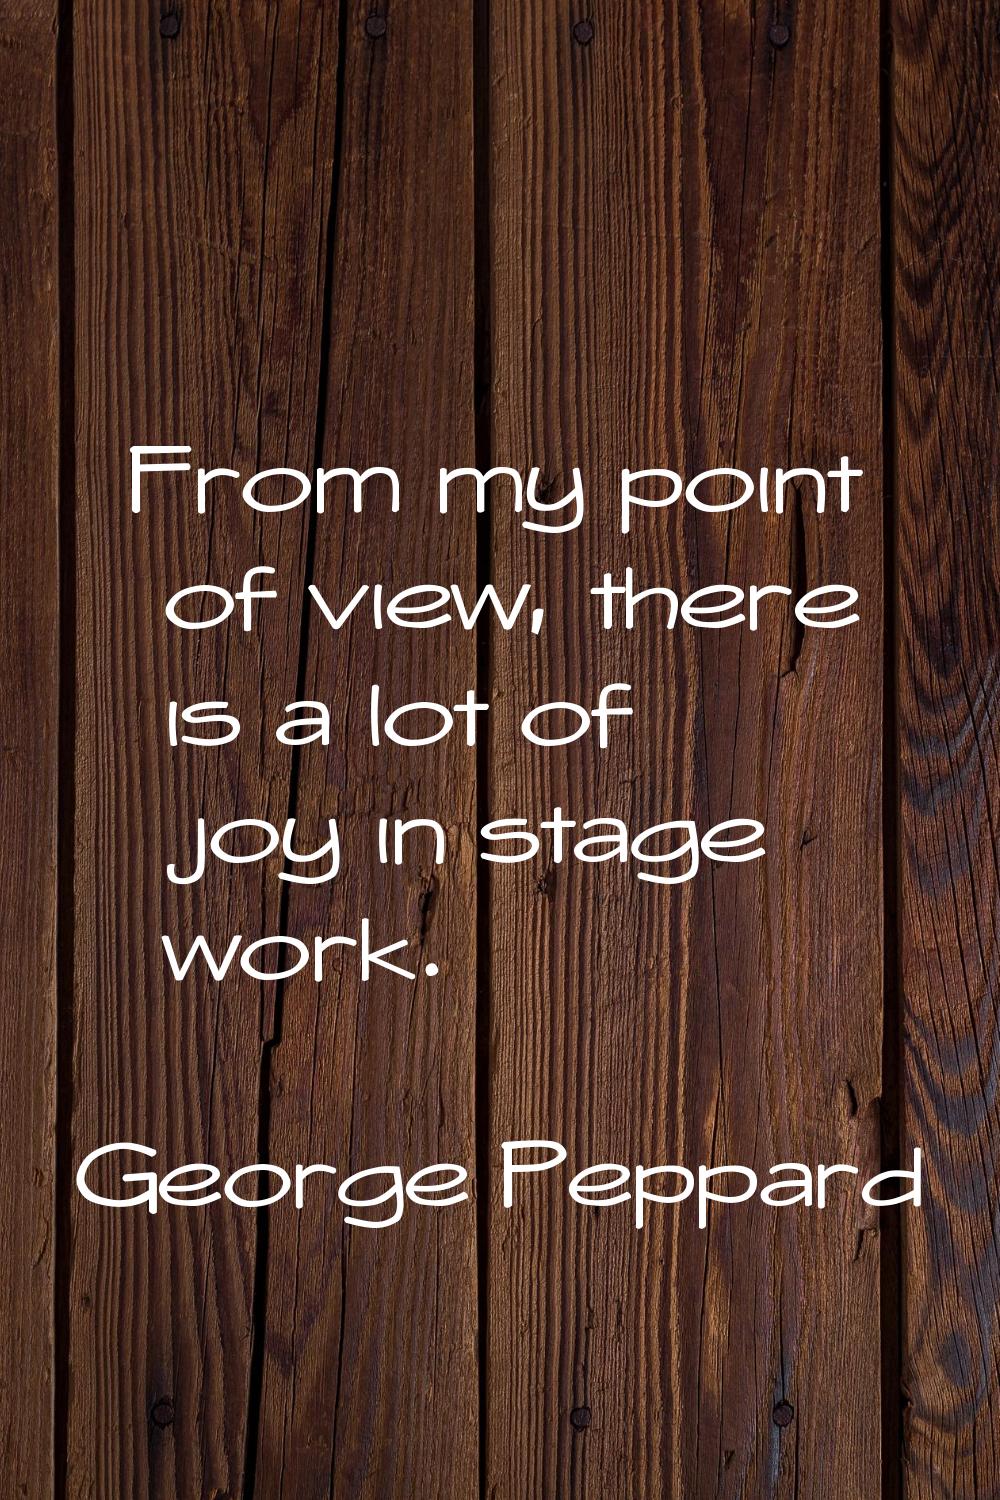 From my point of view, there is a lot of joy in stage work.